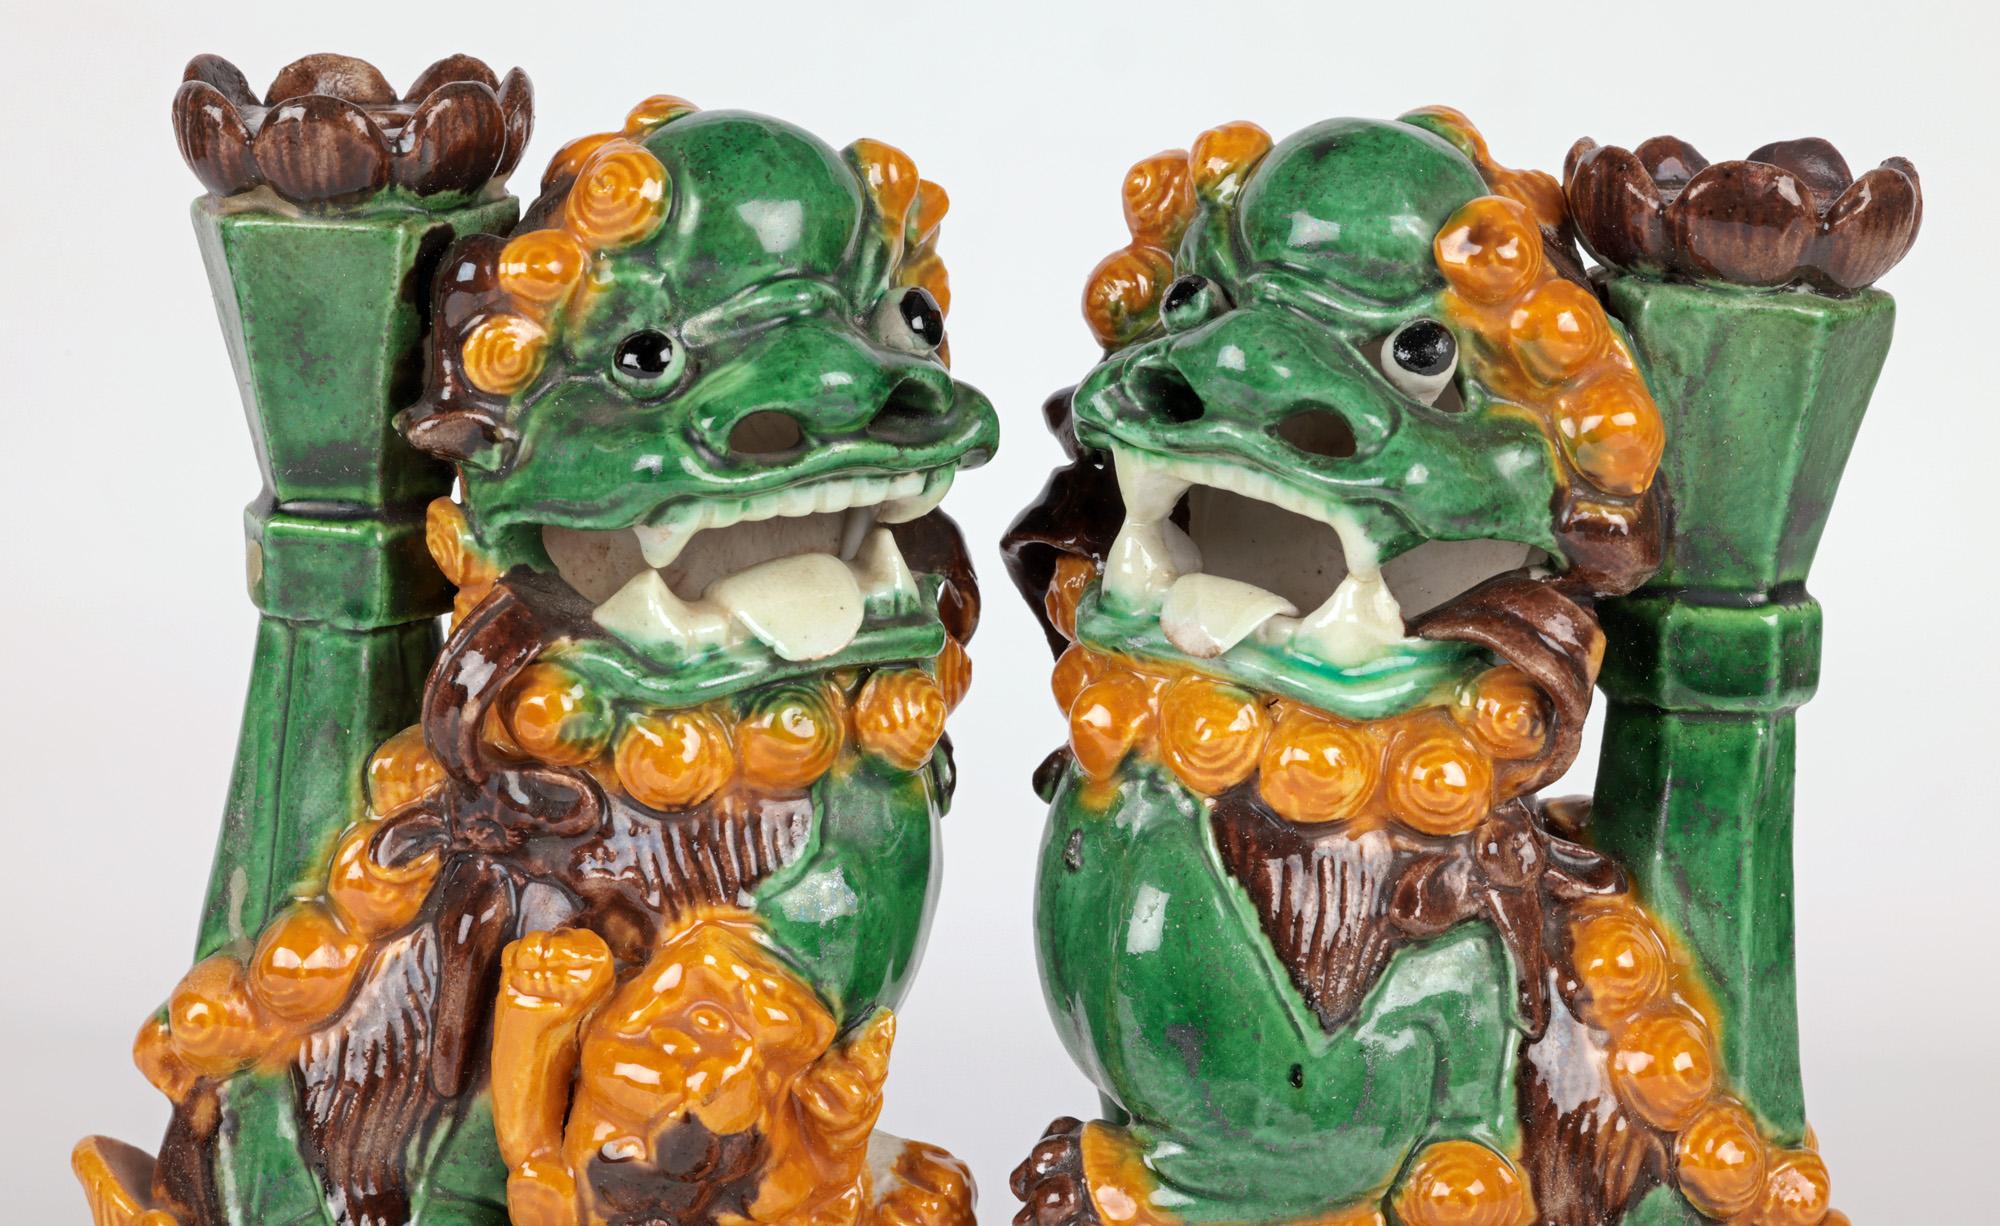 A very fine pair Chinese Qing sancai glazed pottery dog of Foo incense holder figures dating from the 18/19th century. The figures stand raised on hollow rectangular pierced pedestal altar shaped bases with a draped cloth to the front and back. The